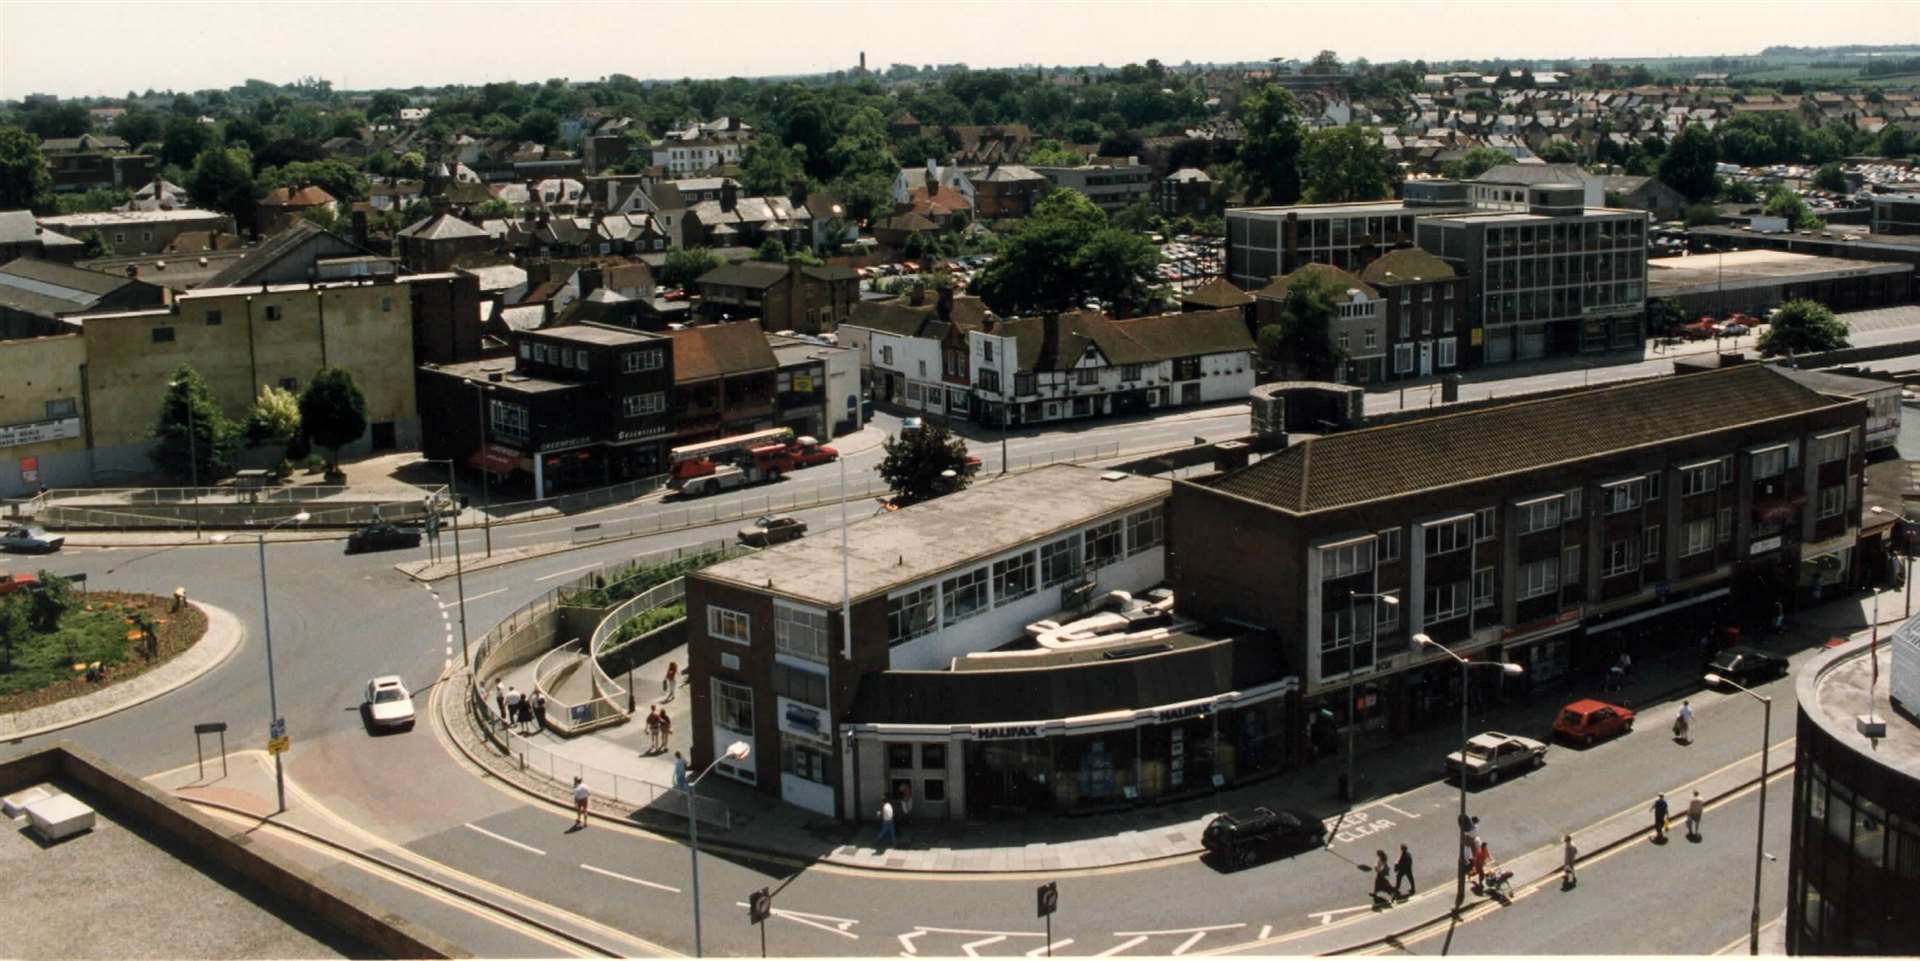 Looking across to St George's Roundabout and Rhodaus Town, Canterbury, in 1992.